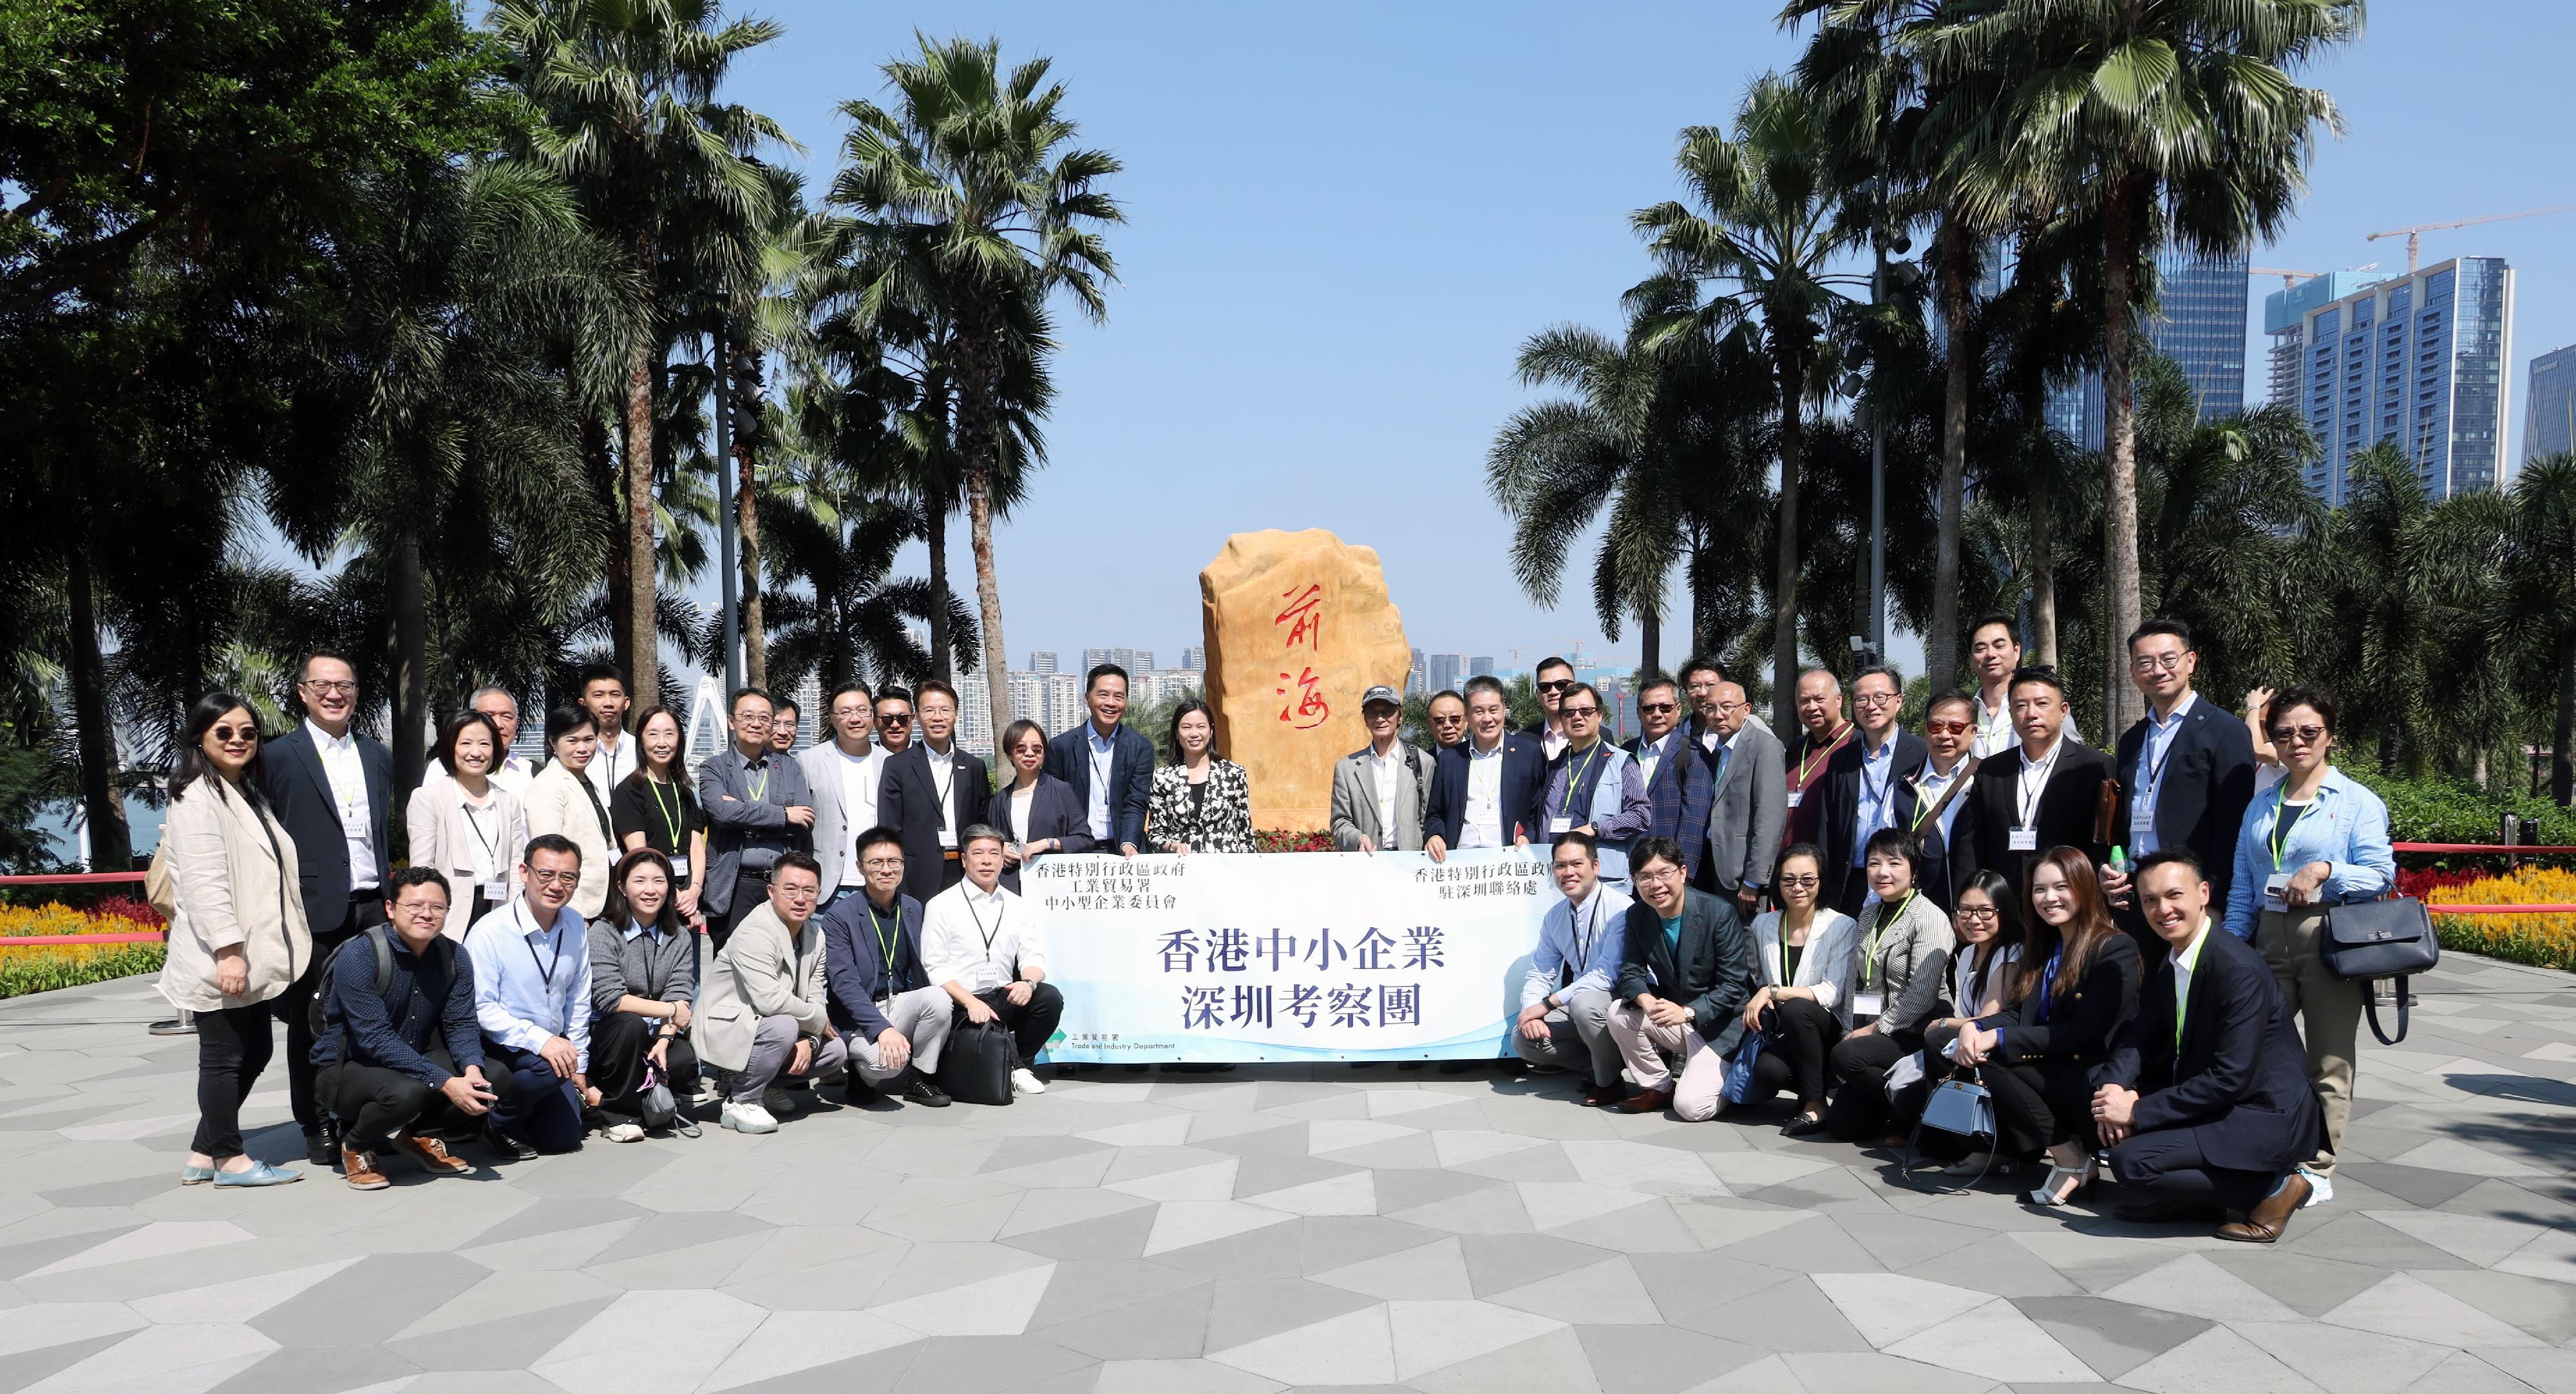 The Trade and Industry Department, the Small and Medium Enterprises Committee and the Shenzhen Liaison Unit of the Hong Kong Special Administrative Region Government led a Hong Kong small and medium enterprises  delegation to Shenzhen today (November 1). The delegation of around 60 participants visited Qianhai Shenzhen-Hong Kong Modern Service Industry Cooperation Zone of Shenzhen Municipality.
